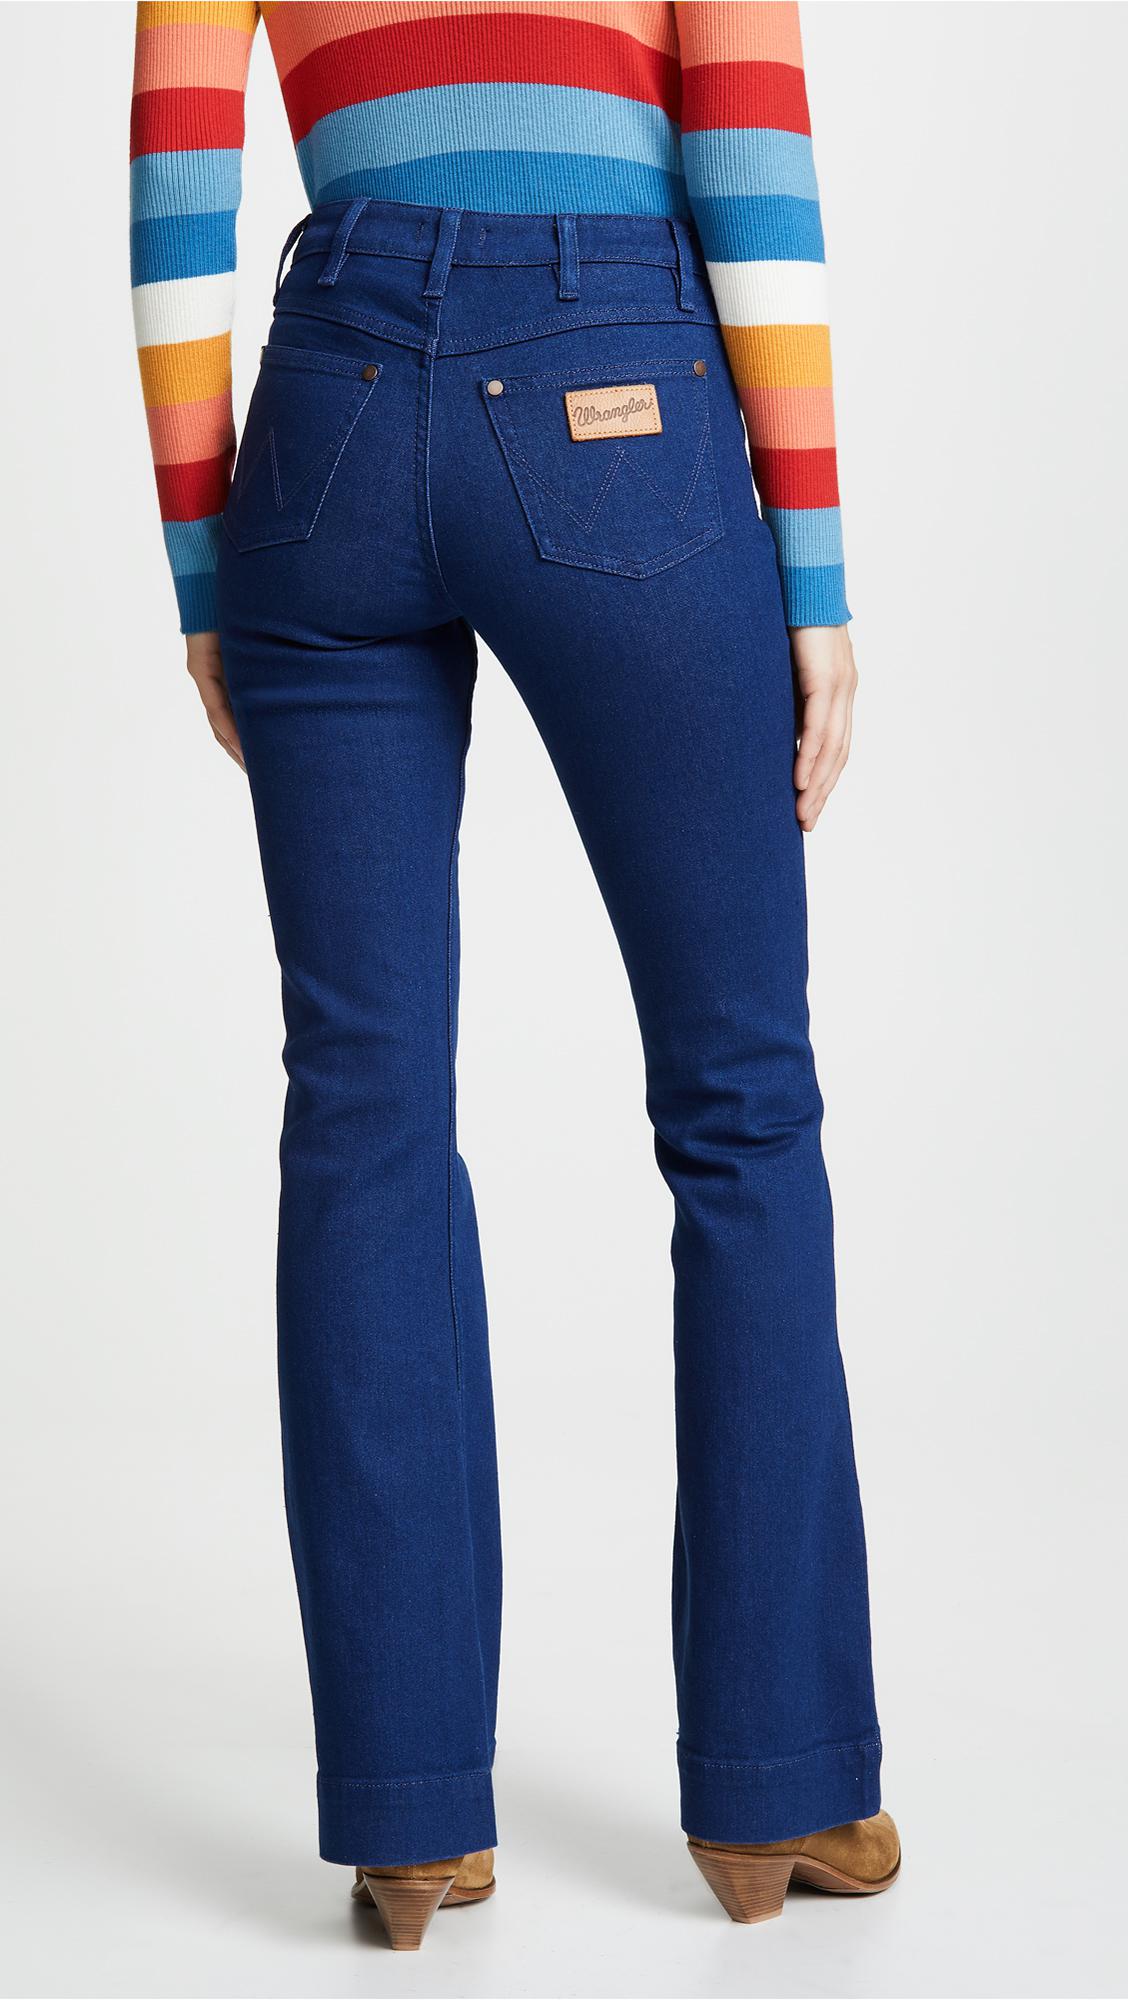 Boot cut jeans - jawerqr